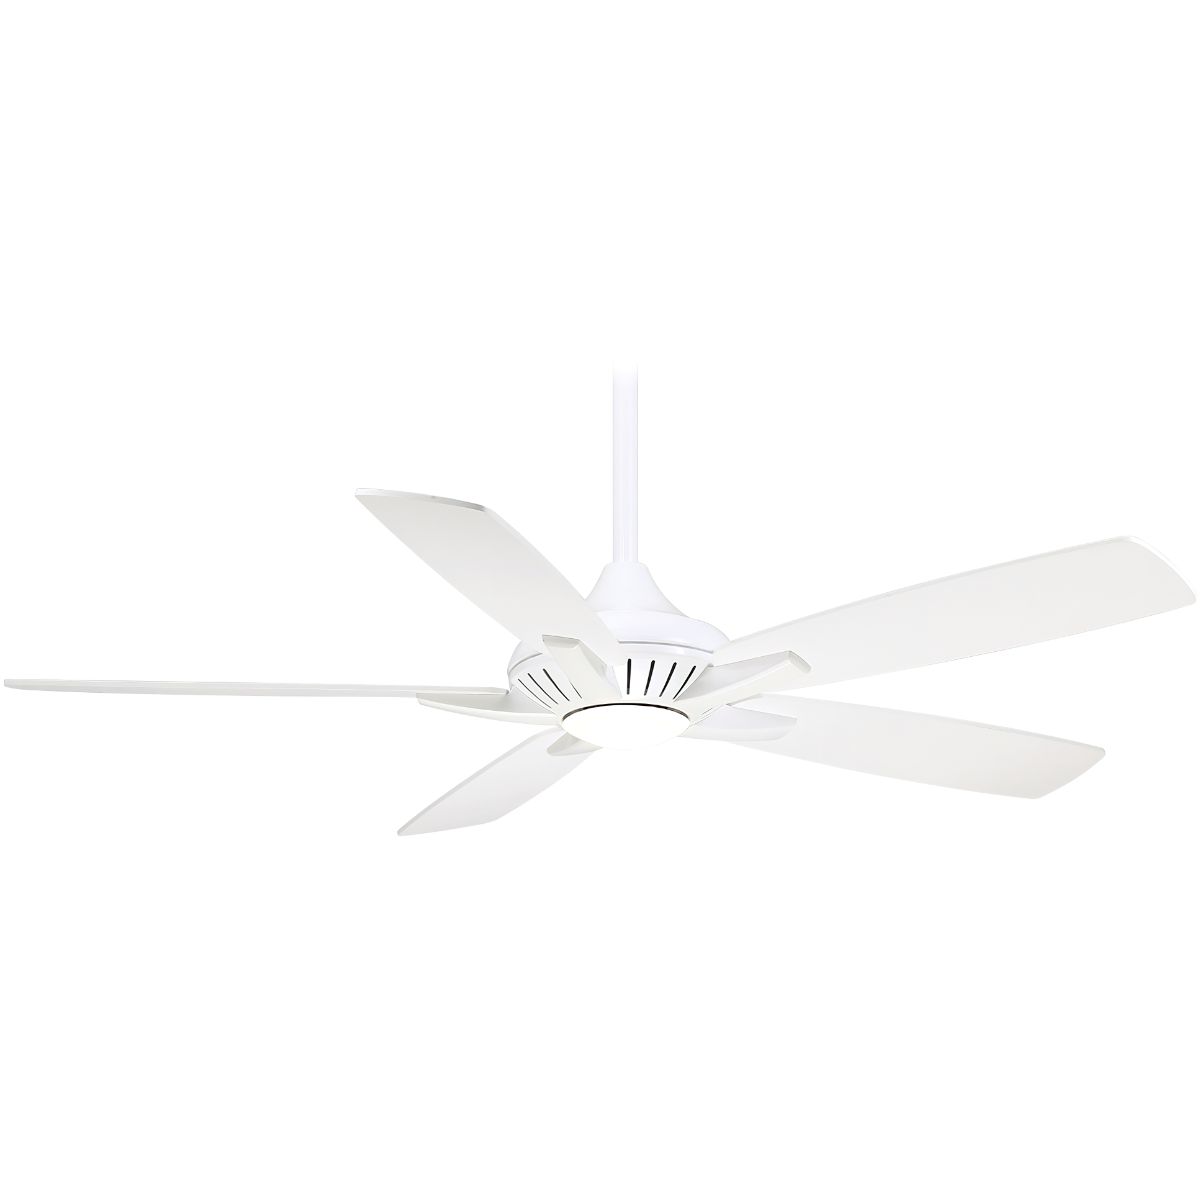 Dyno 52 Inch Ceiling Fan With Light And Remote, White Finish